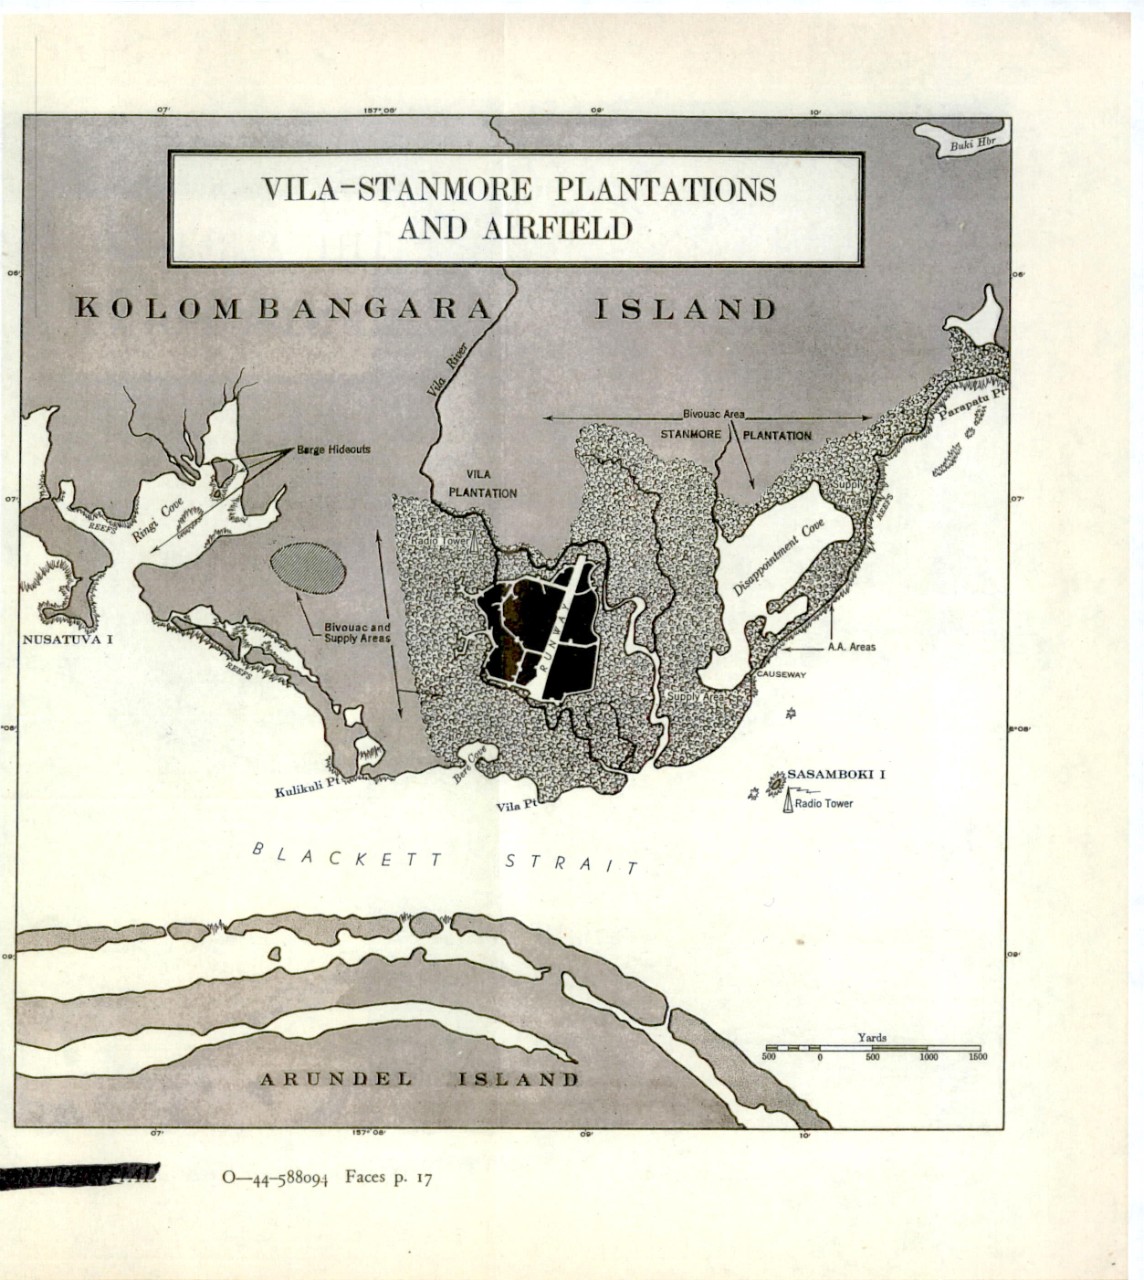 Vila-Stanmore Plantations and airfield 